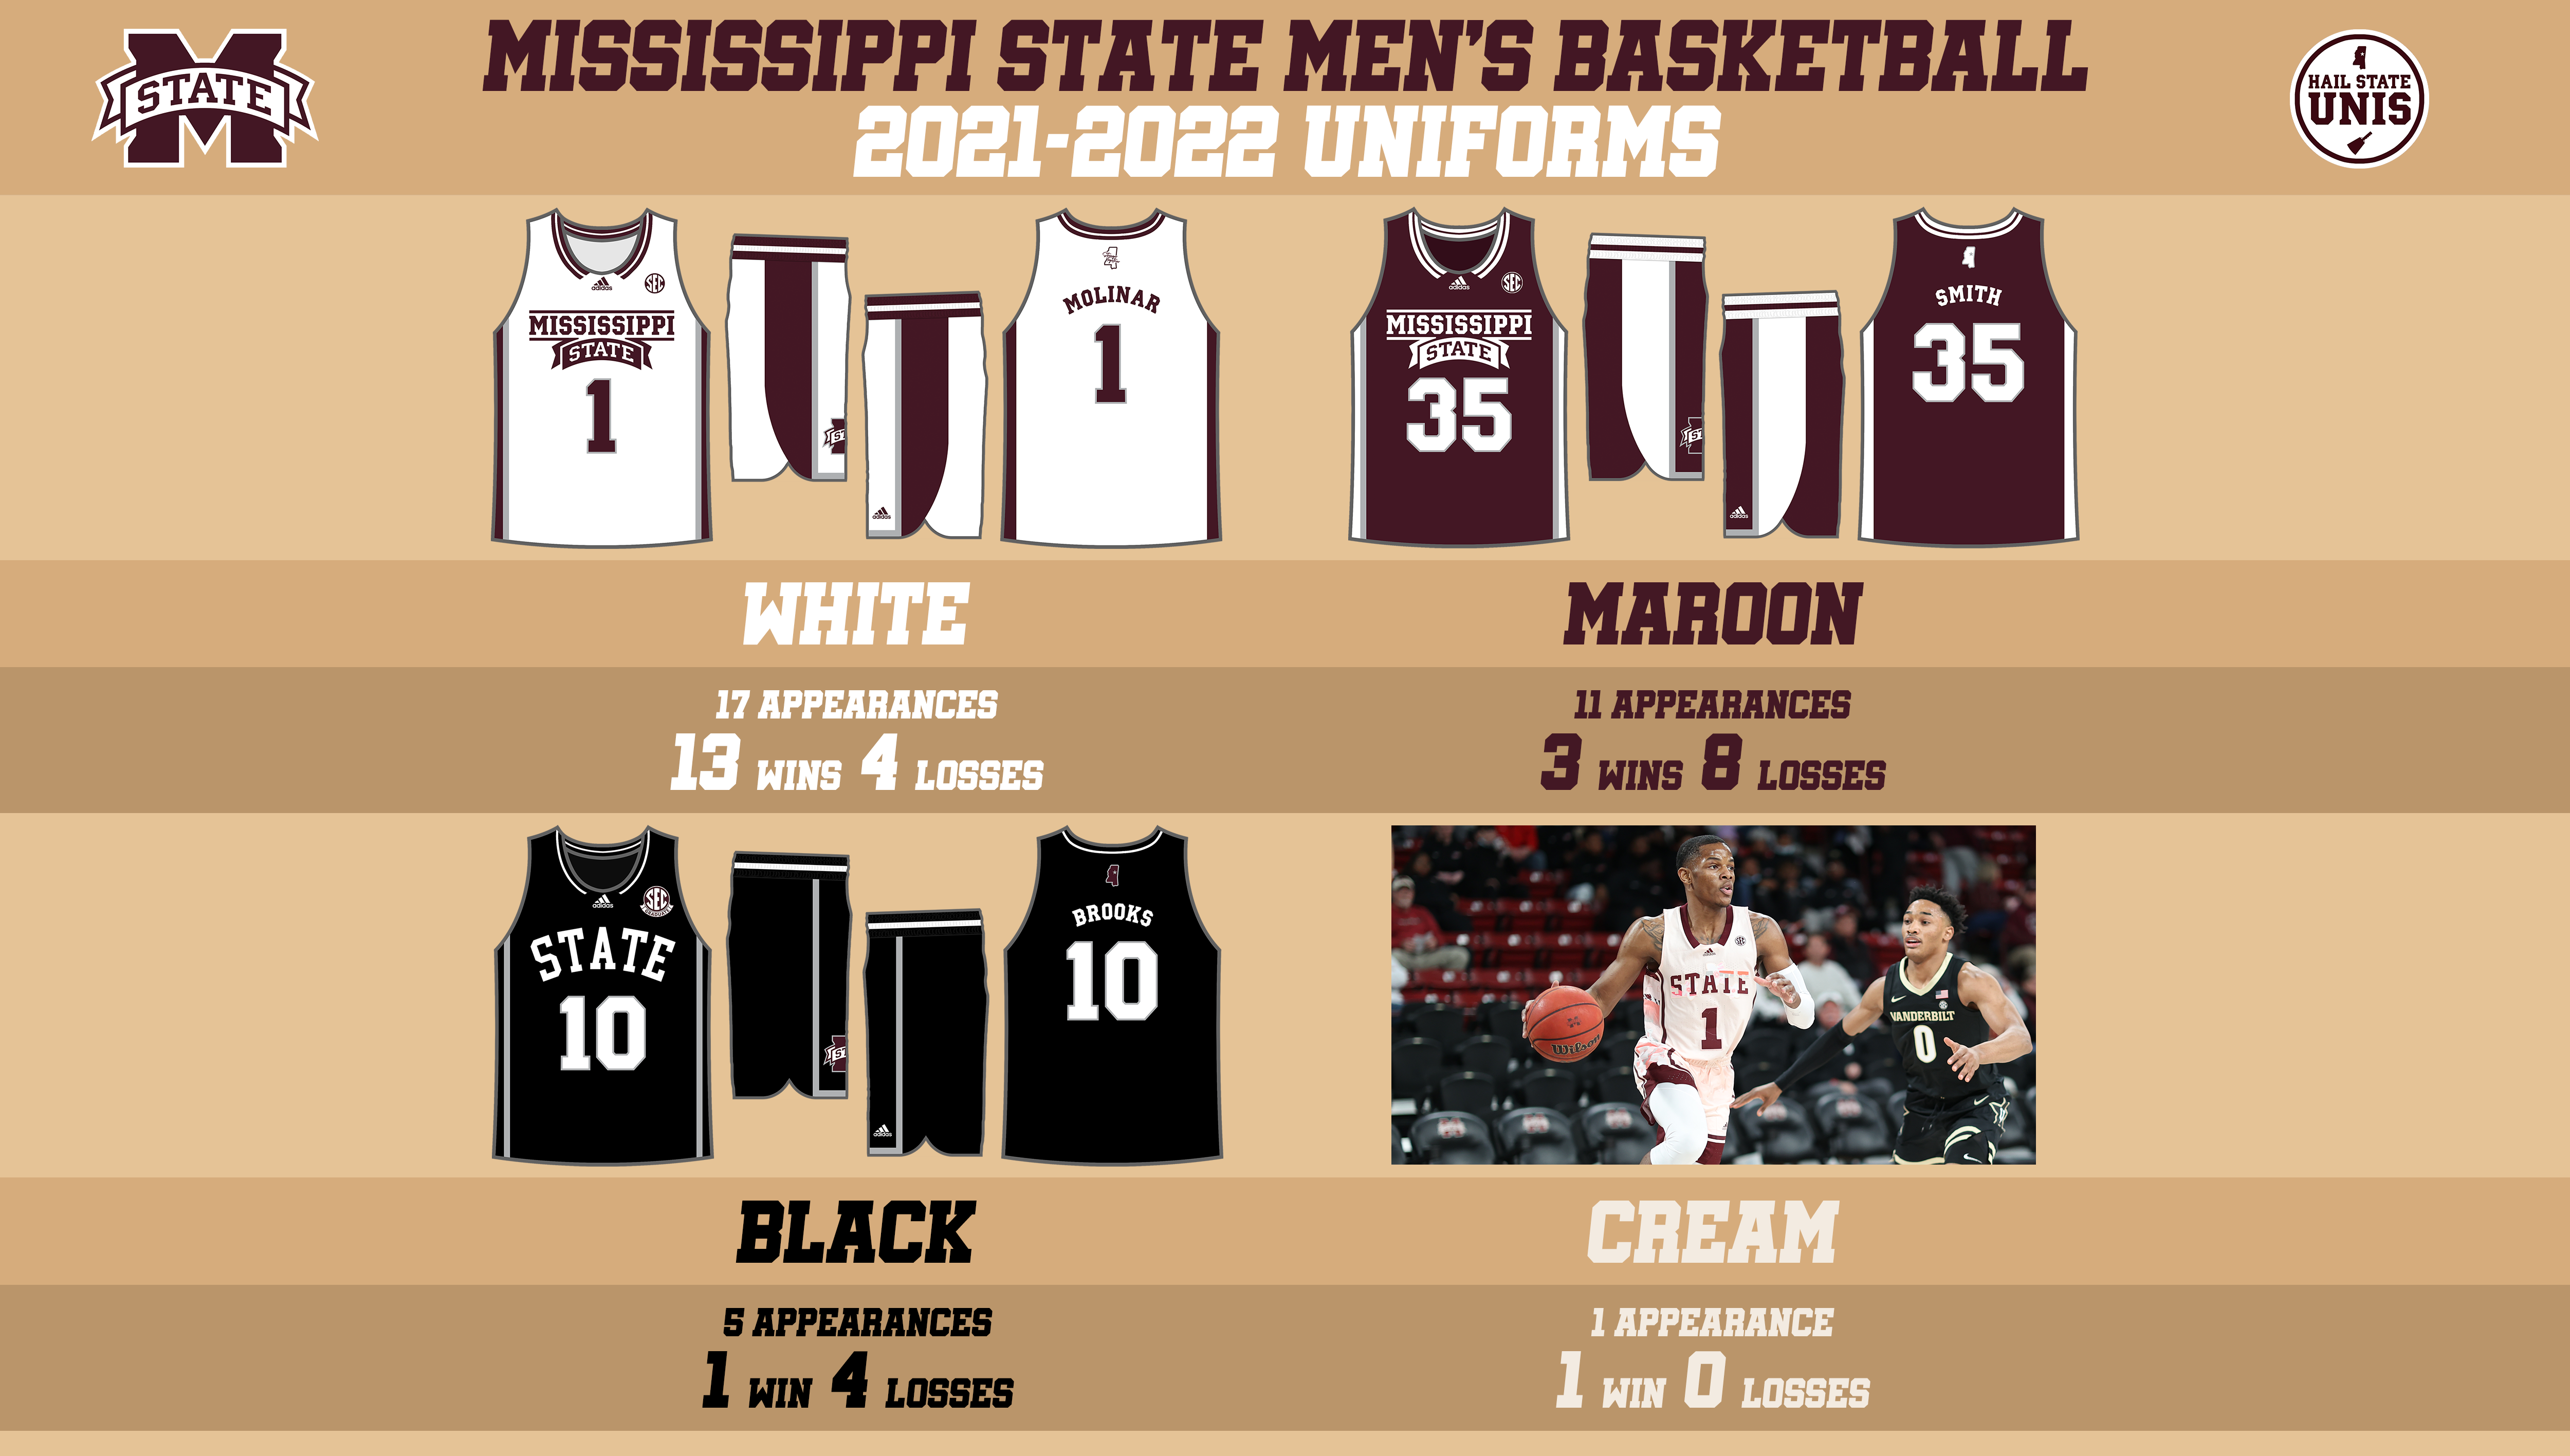 2021 Basketball Uniforms Concept - Hail State Unis